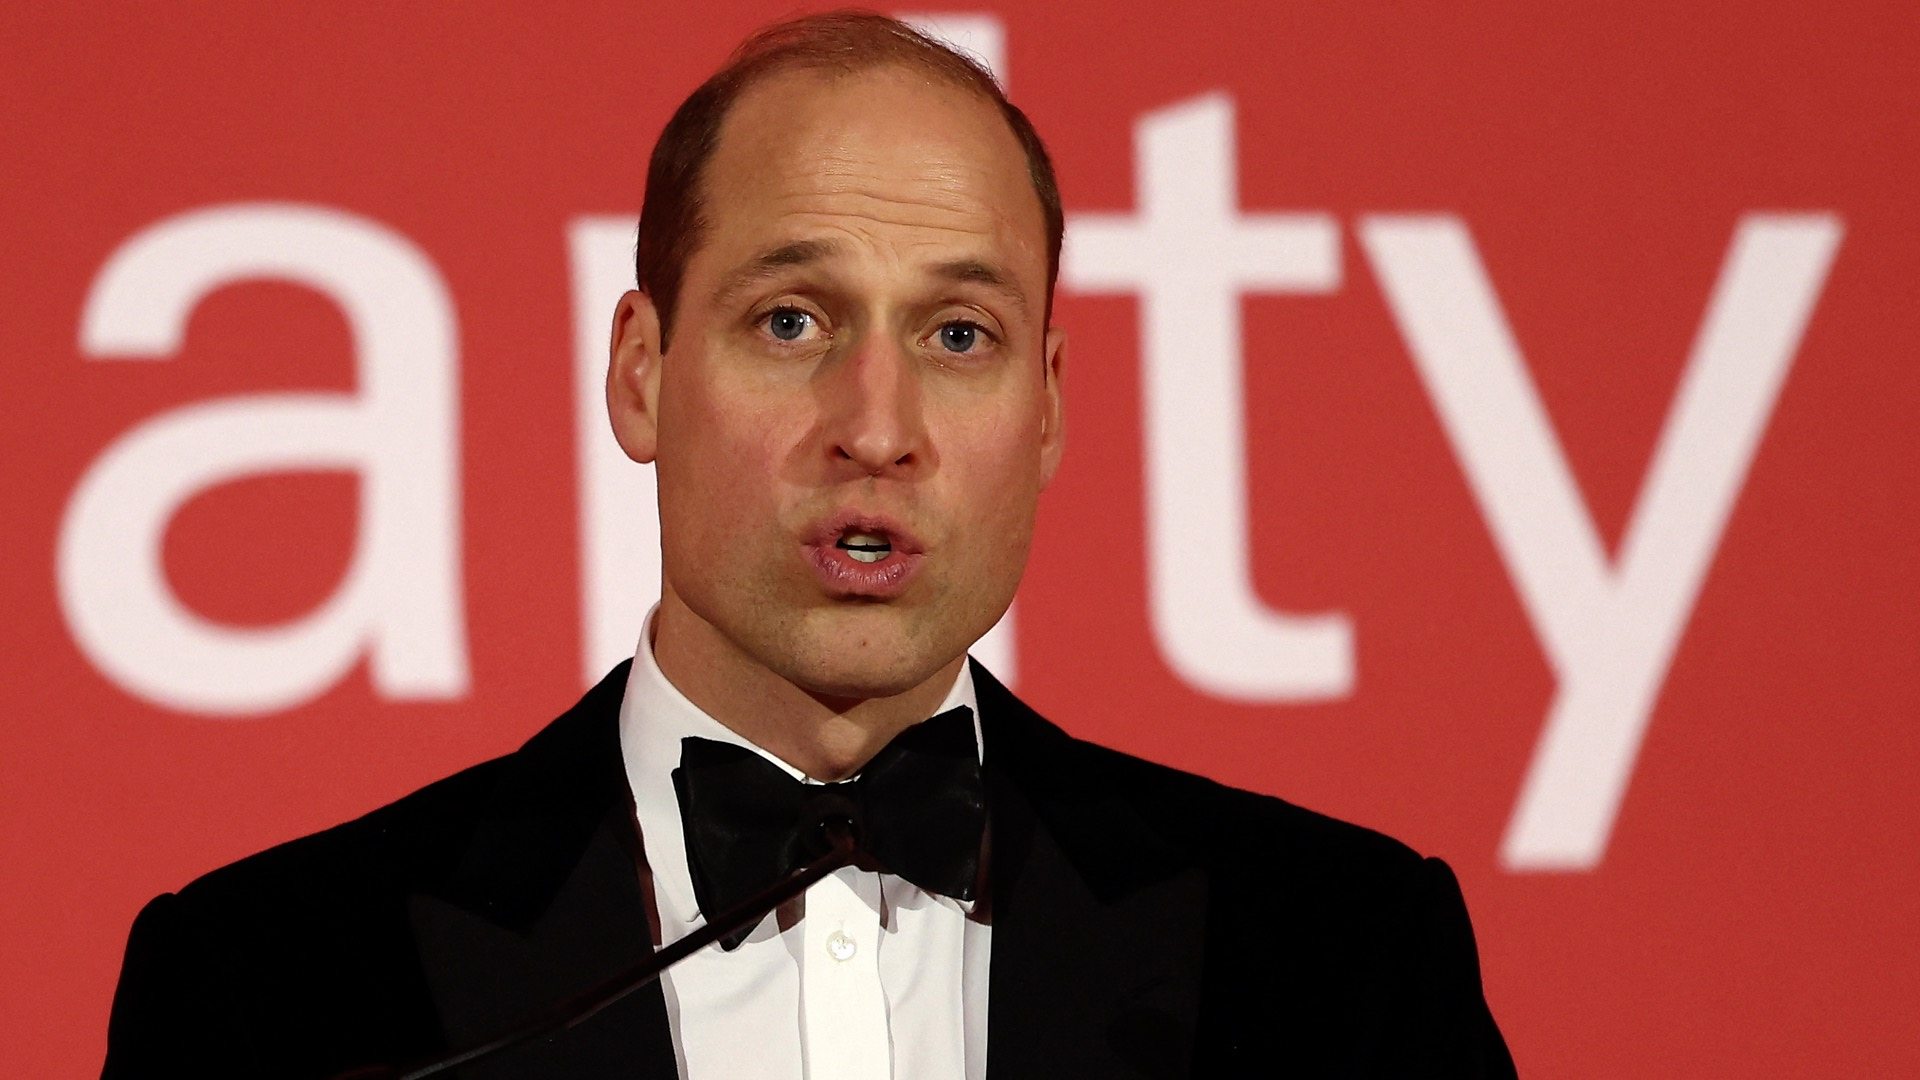 Humanitarian aid delivery and hostage release emphasised upon by Prince William in public address (Credits: BBC)